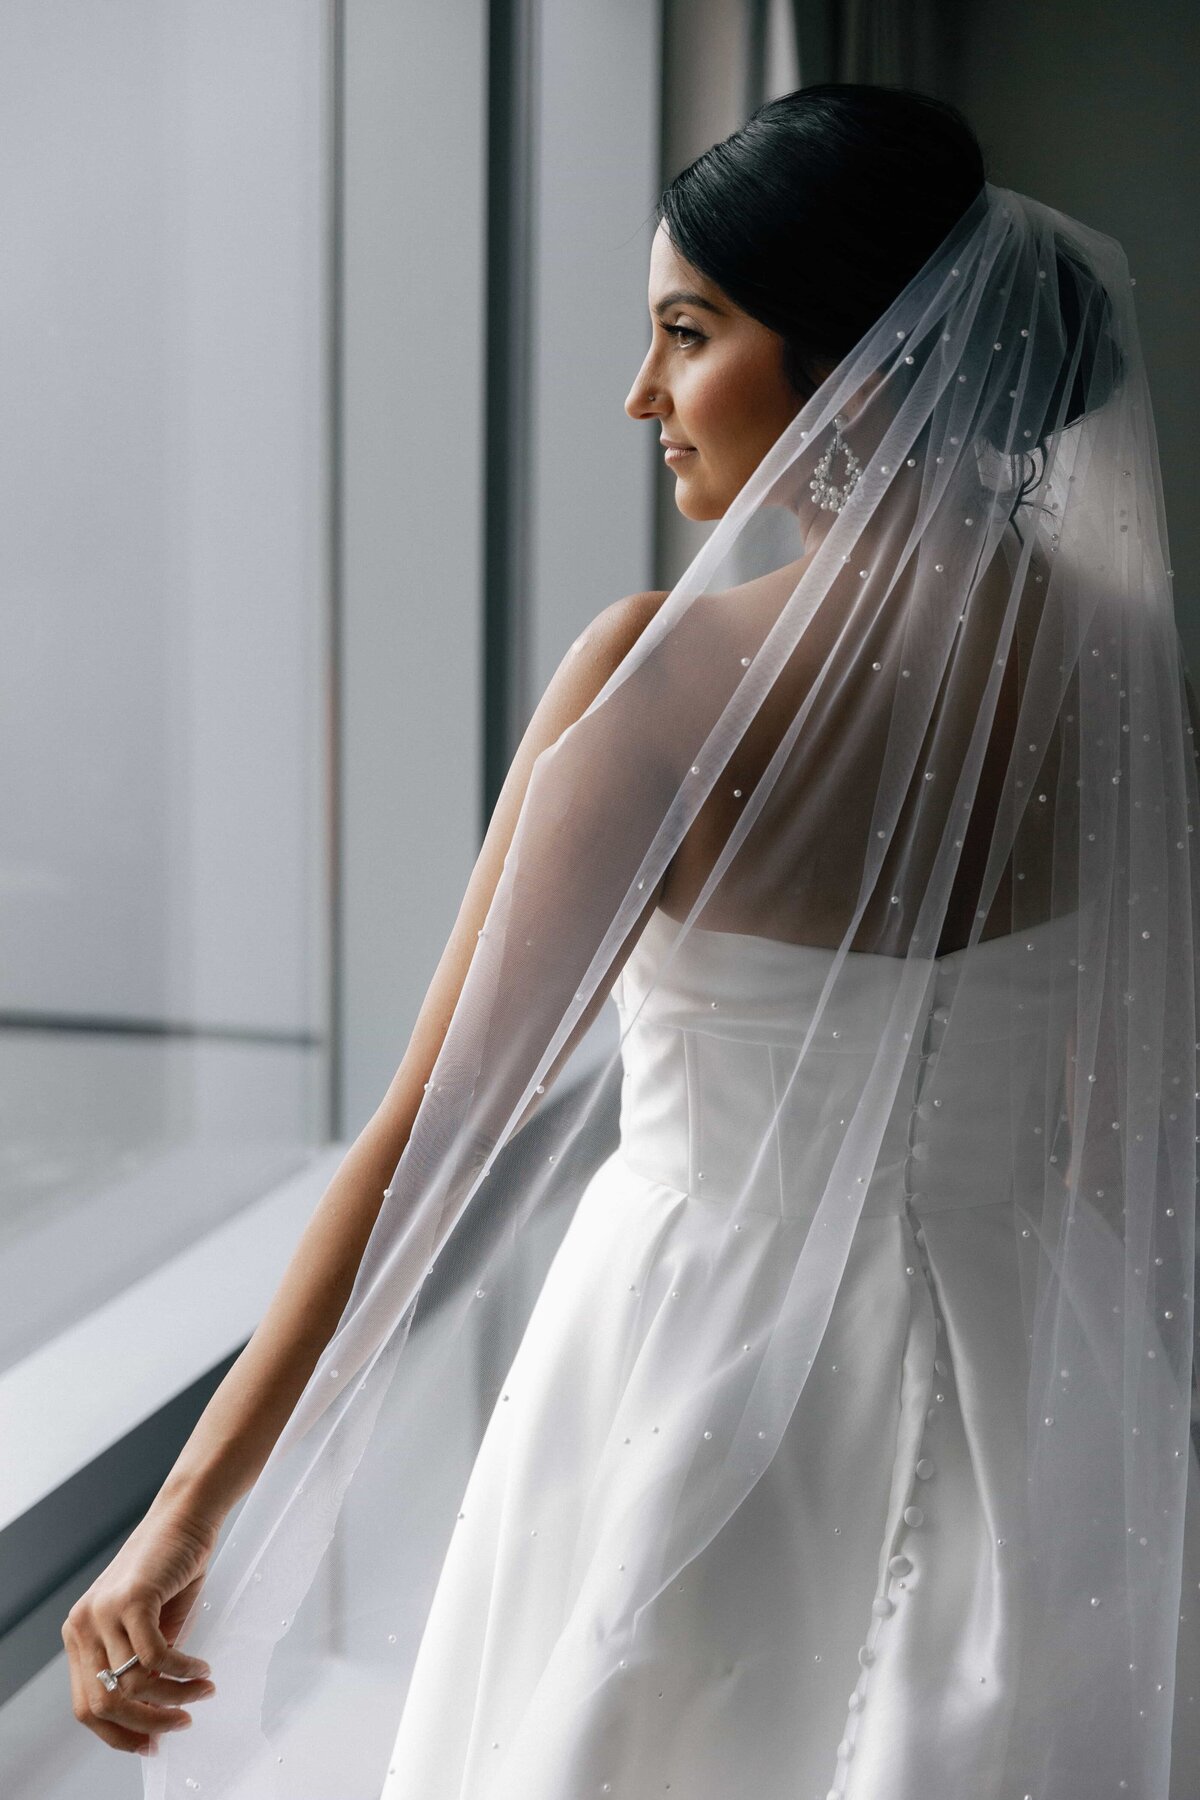 Bride with Cathedral Veil